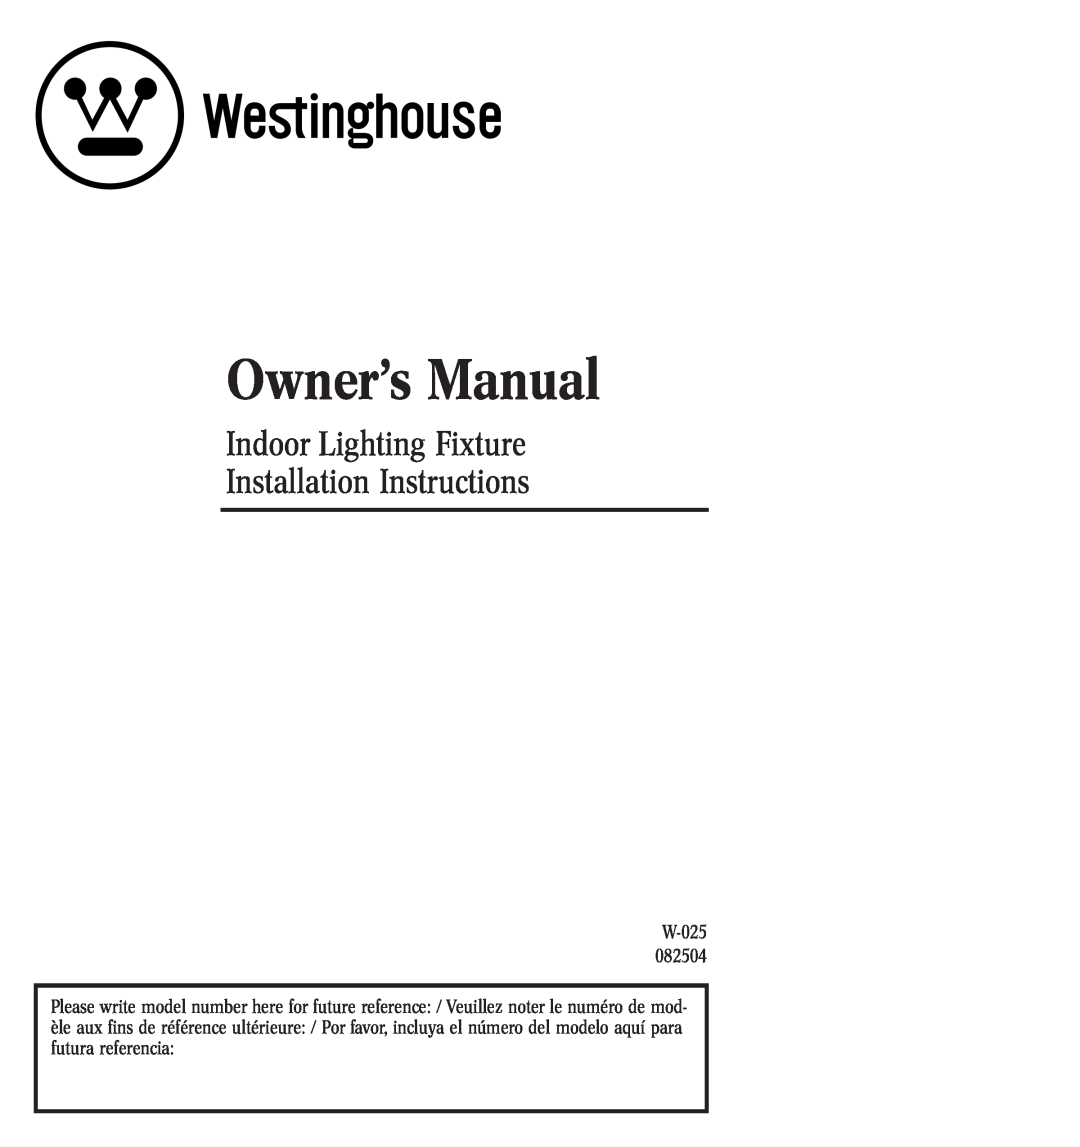 Westinghouse w-025 owner manual Indoor Lighting Fixture Installation Instructions 